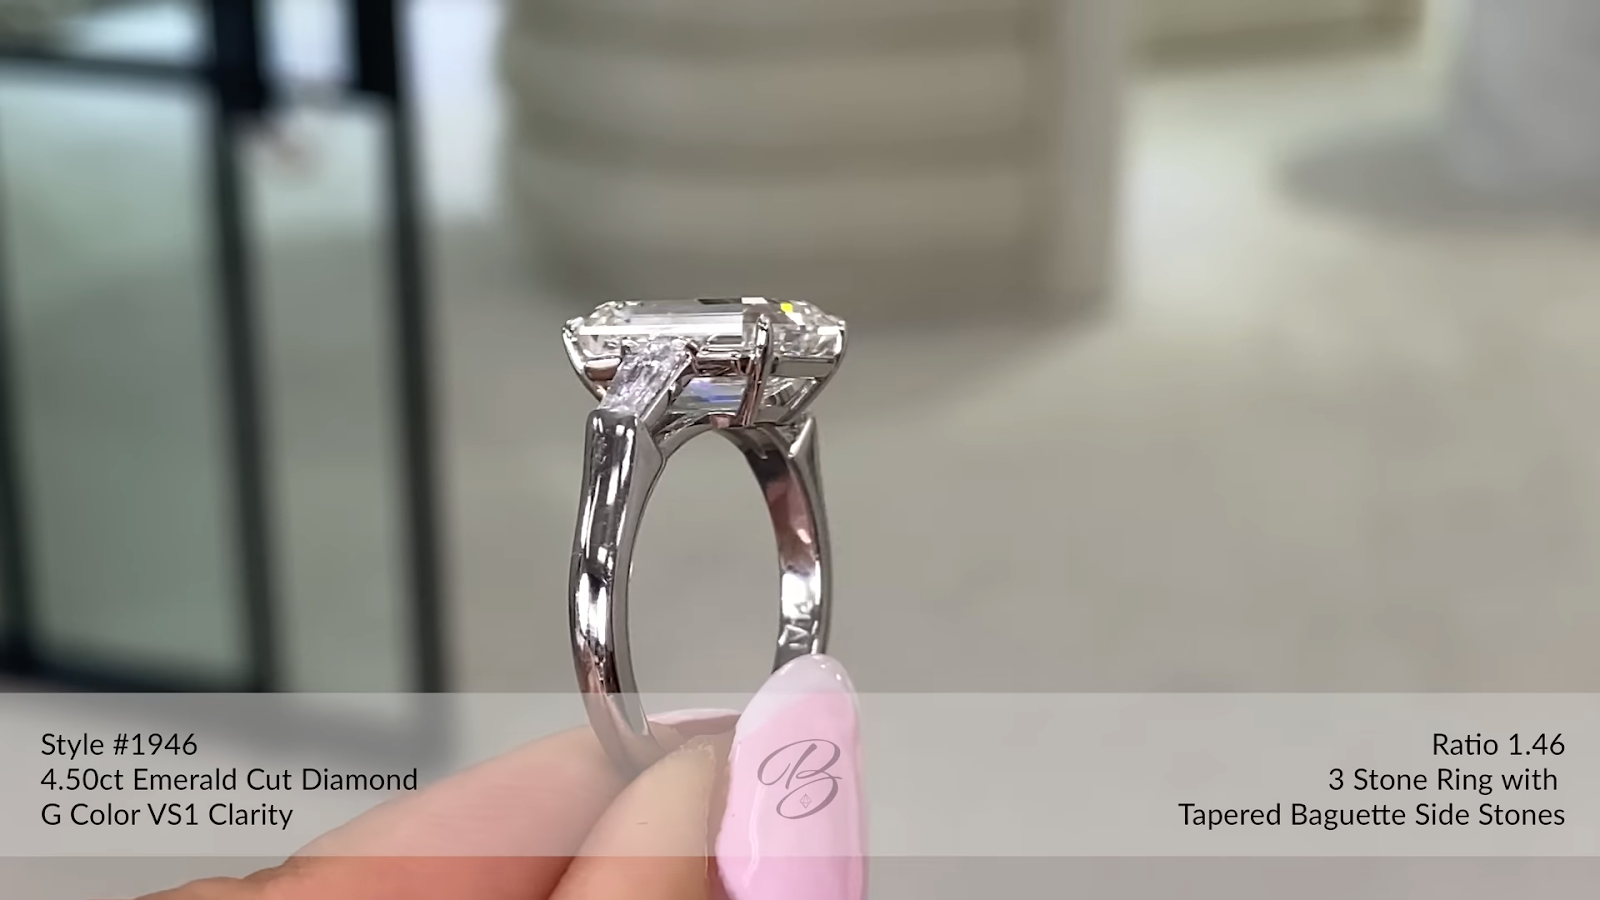 4.50ct Emerald Cut Diamond with Tapered Baguette Side Stones